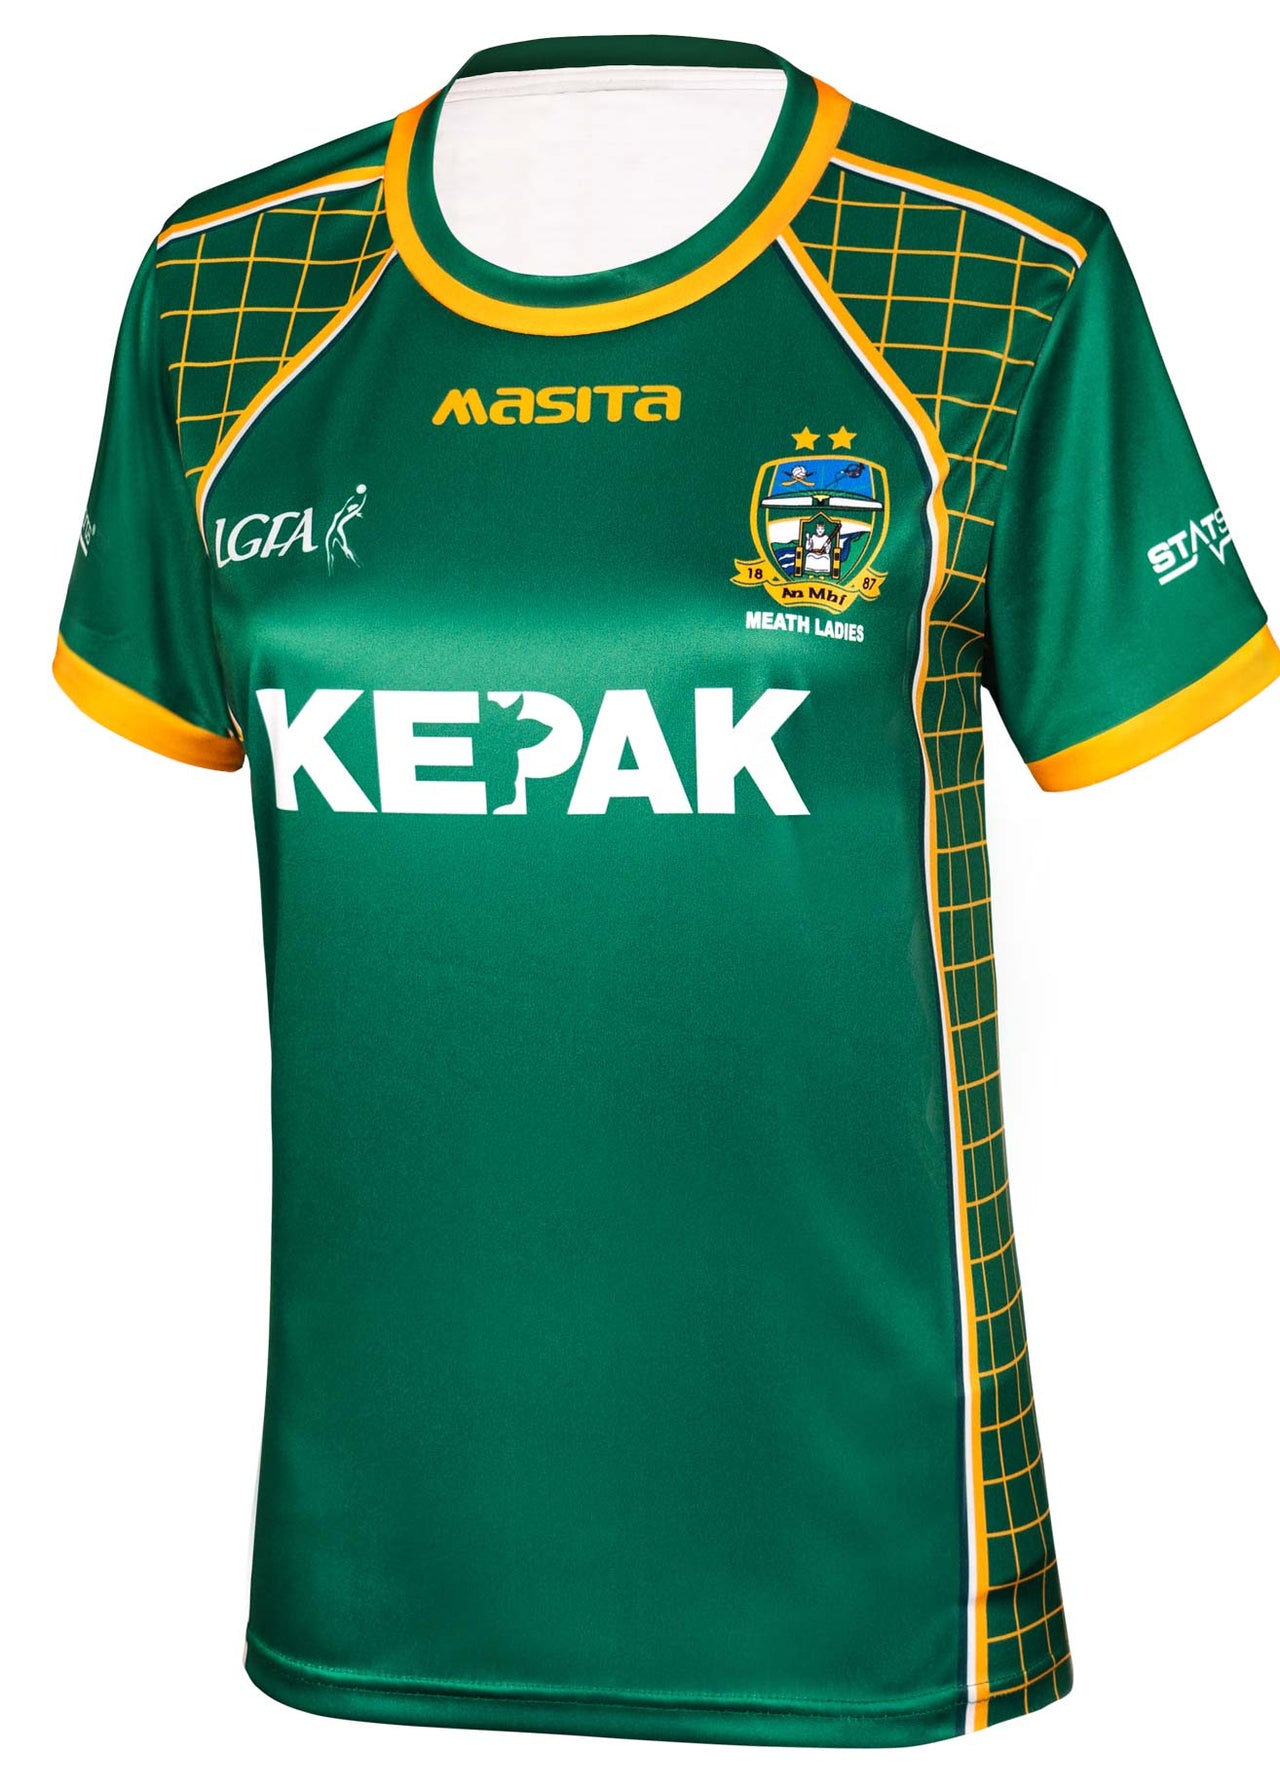 Meath Ladies Home Jersey Player Fit Adult